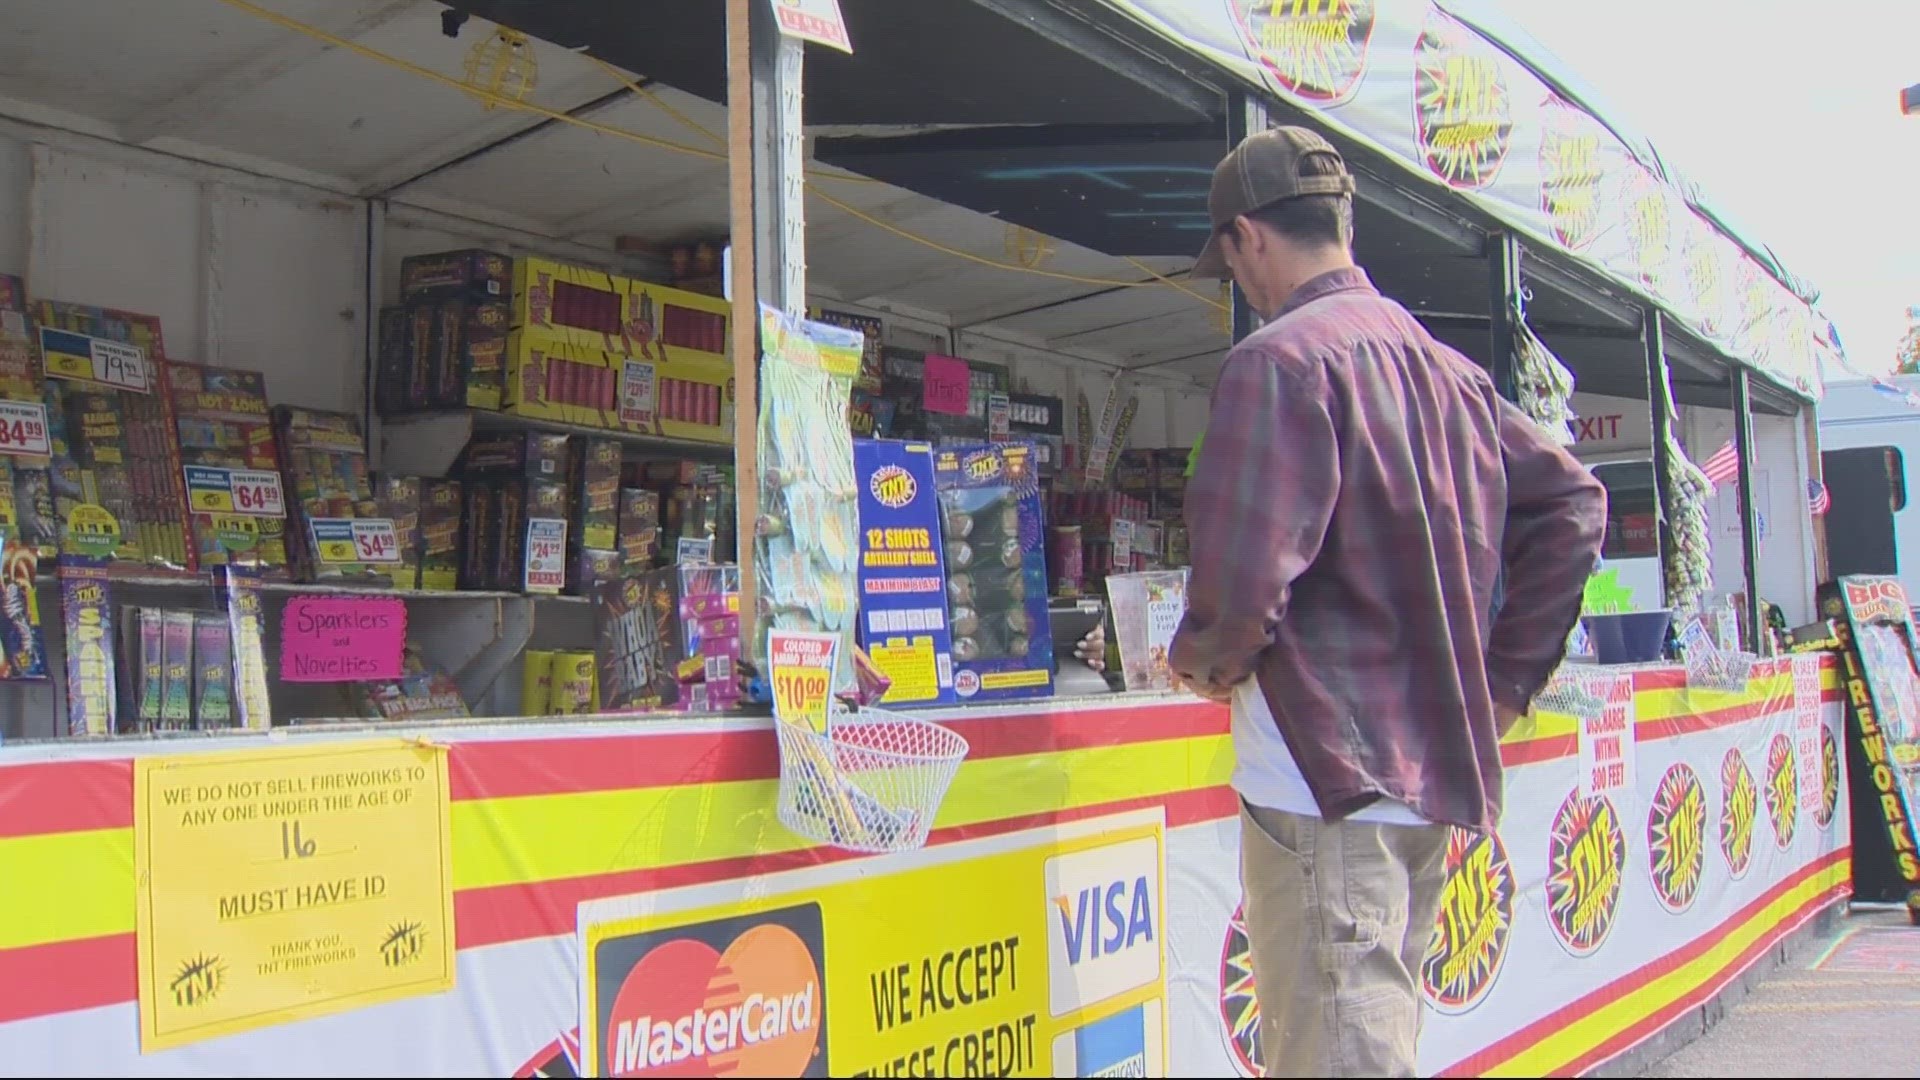 We’re coming up on the Fourth of July, but areas like Portland, Vancouver and Milwaukie have outlawed fireworks. Other areas have strict rules.